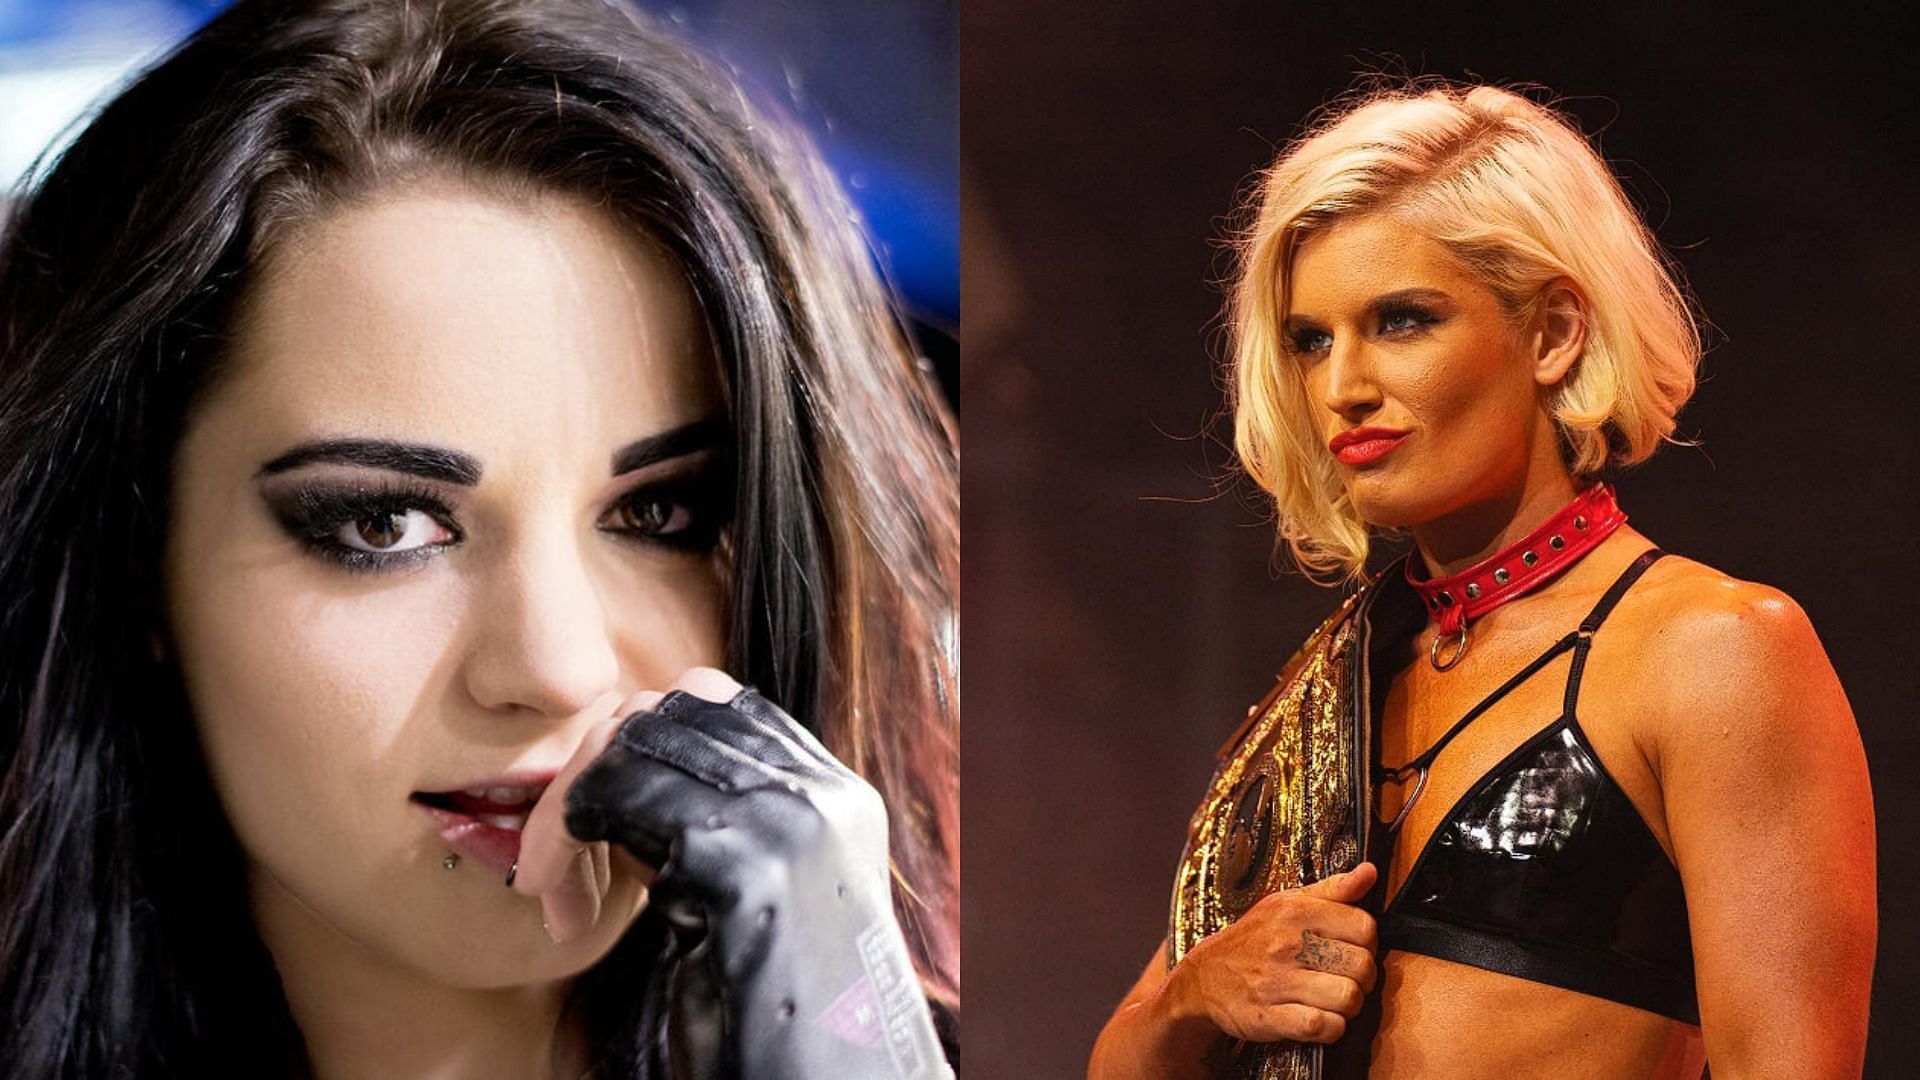 Saraya and Toni Storm are two former WWE Superstars who have become Women